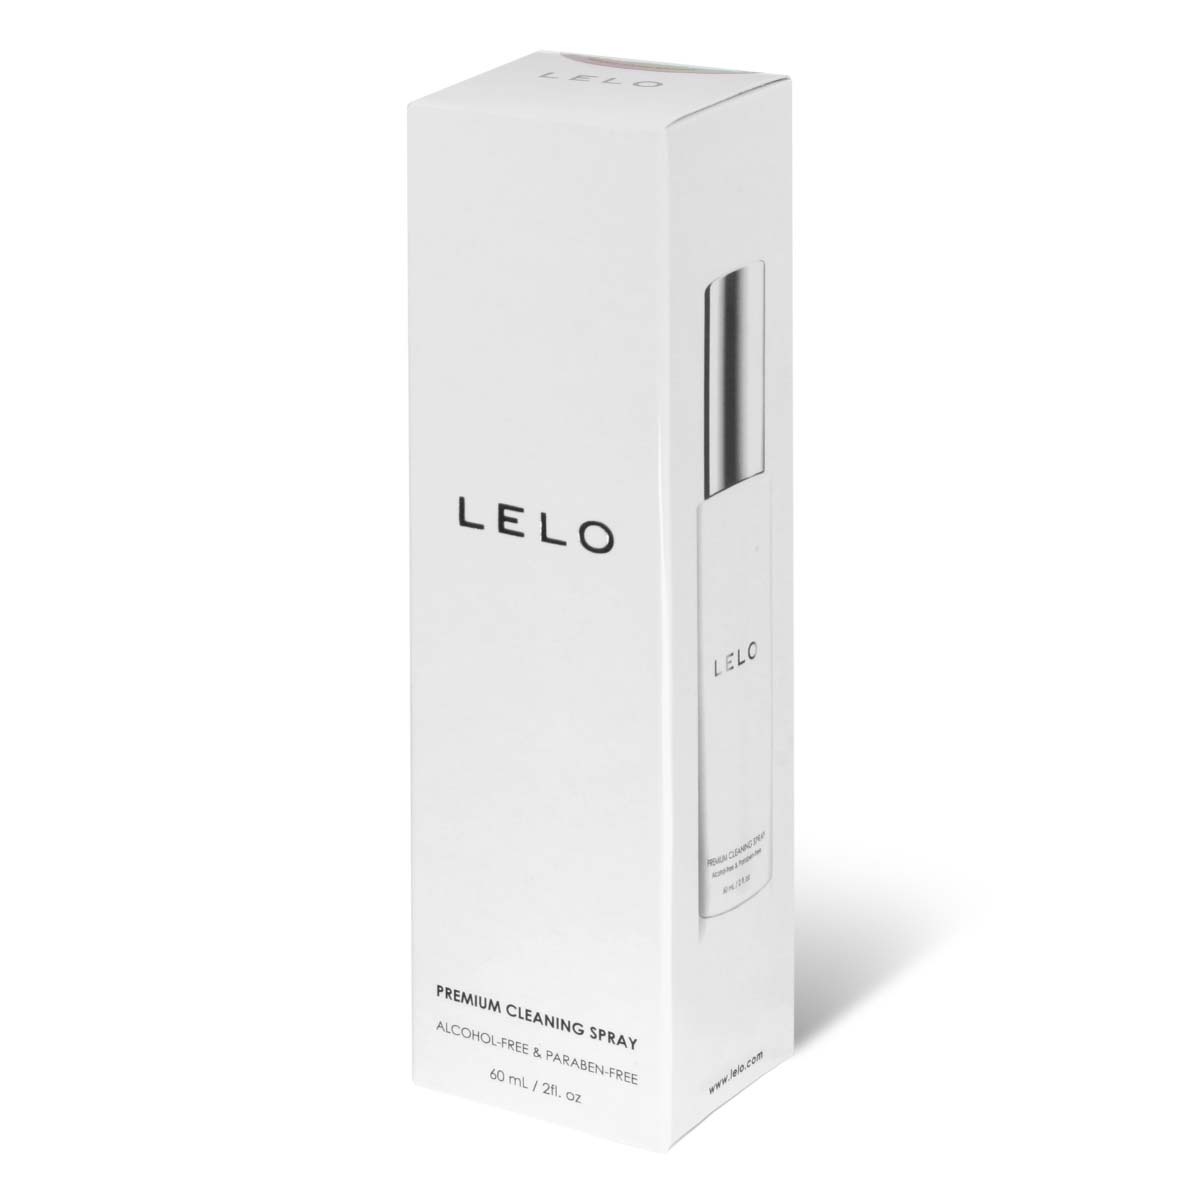 LELO (Toy) Cleaning Spray 60ml-p_1